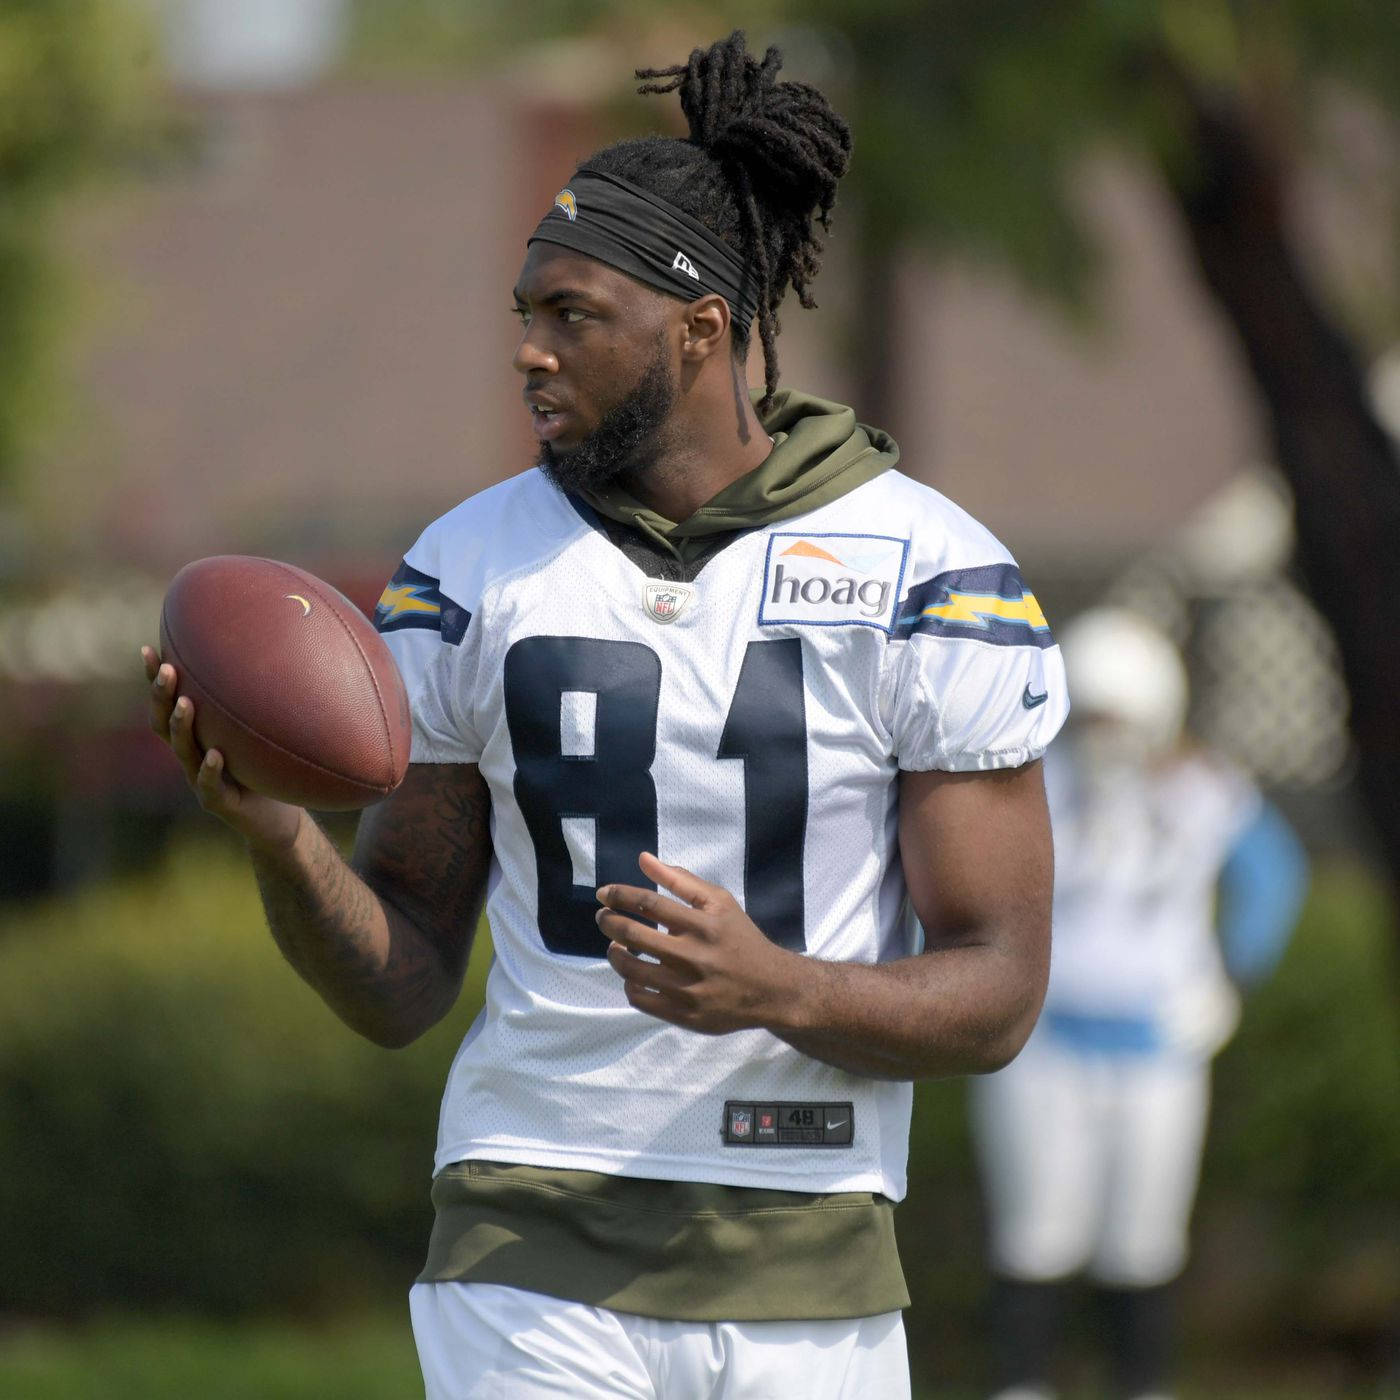 Mikewilliams Nfl Training Camp - Mike Williams Nfl Trainingslager Wallpaper